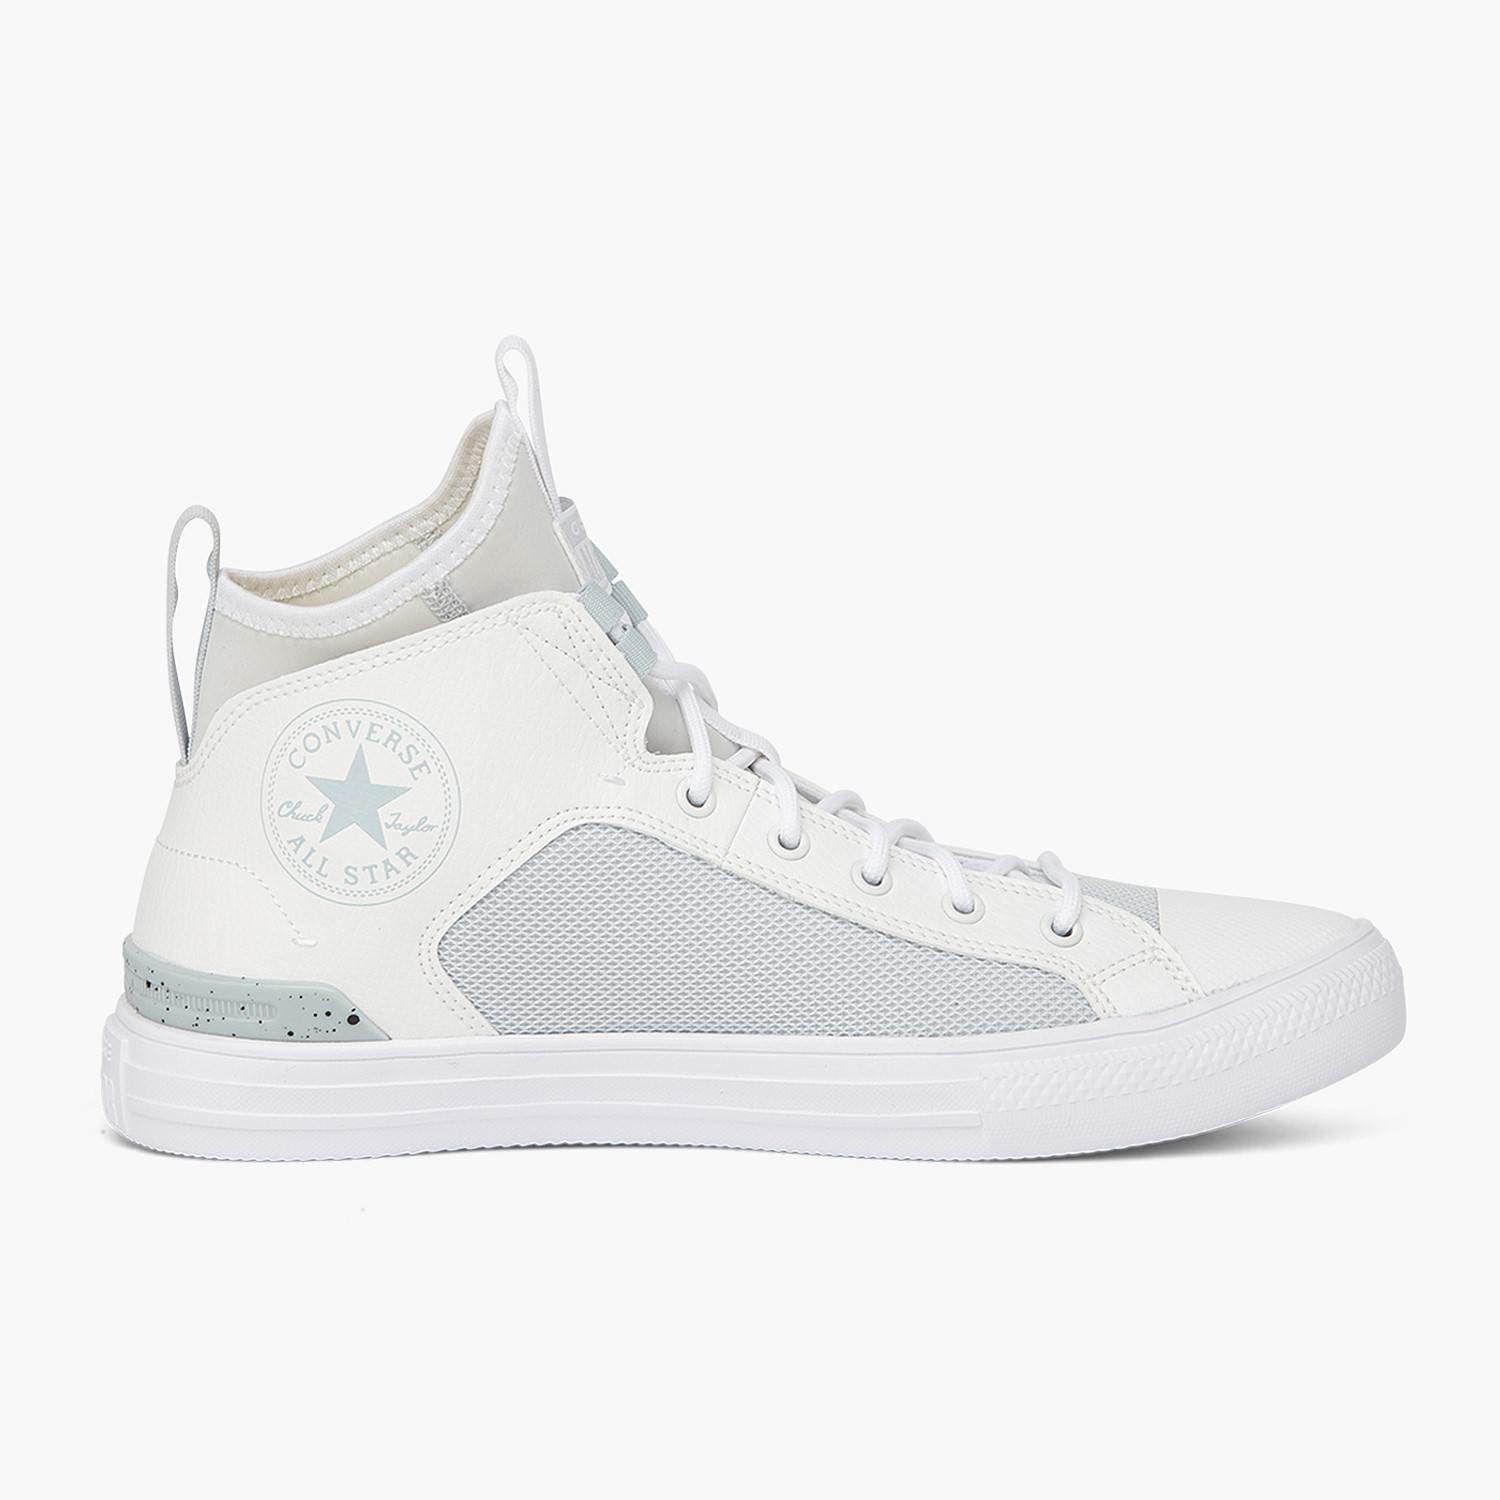 stirling sports converse